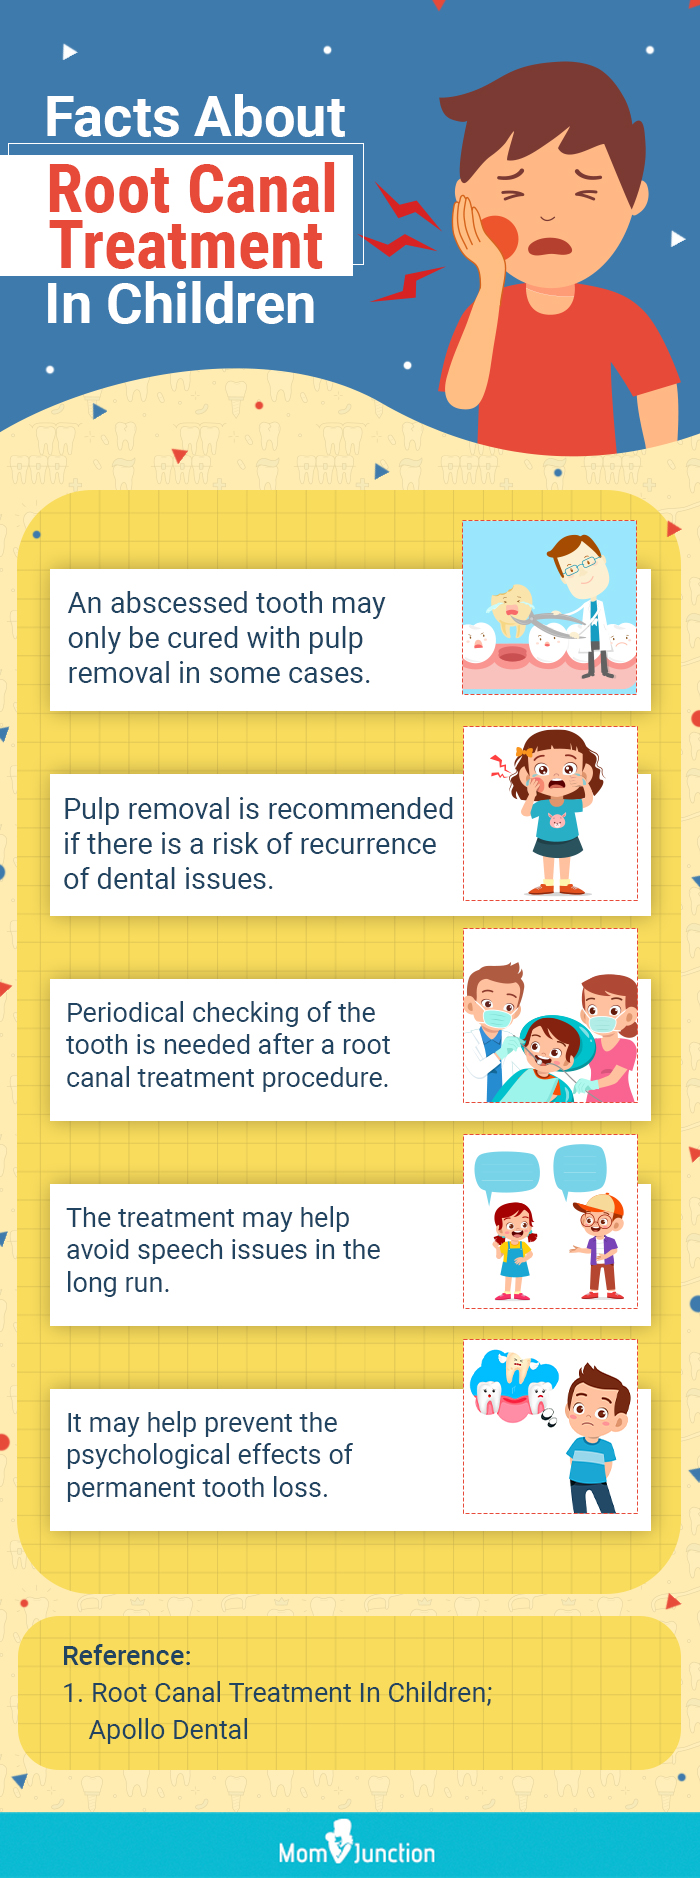 facts about root canal treatment in children (infographic)